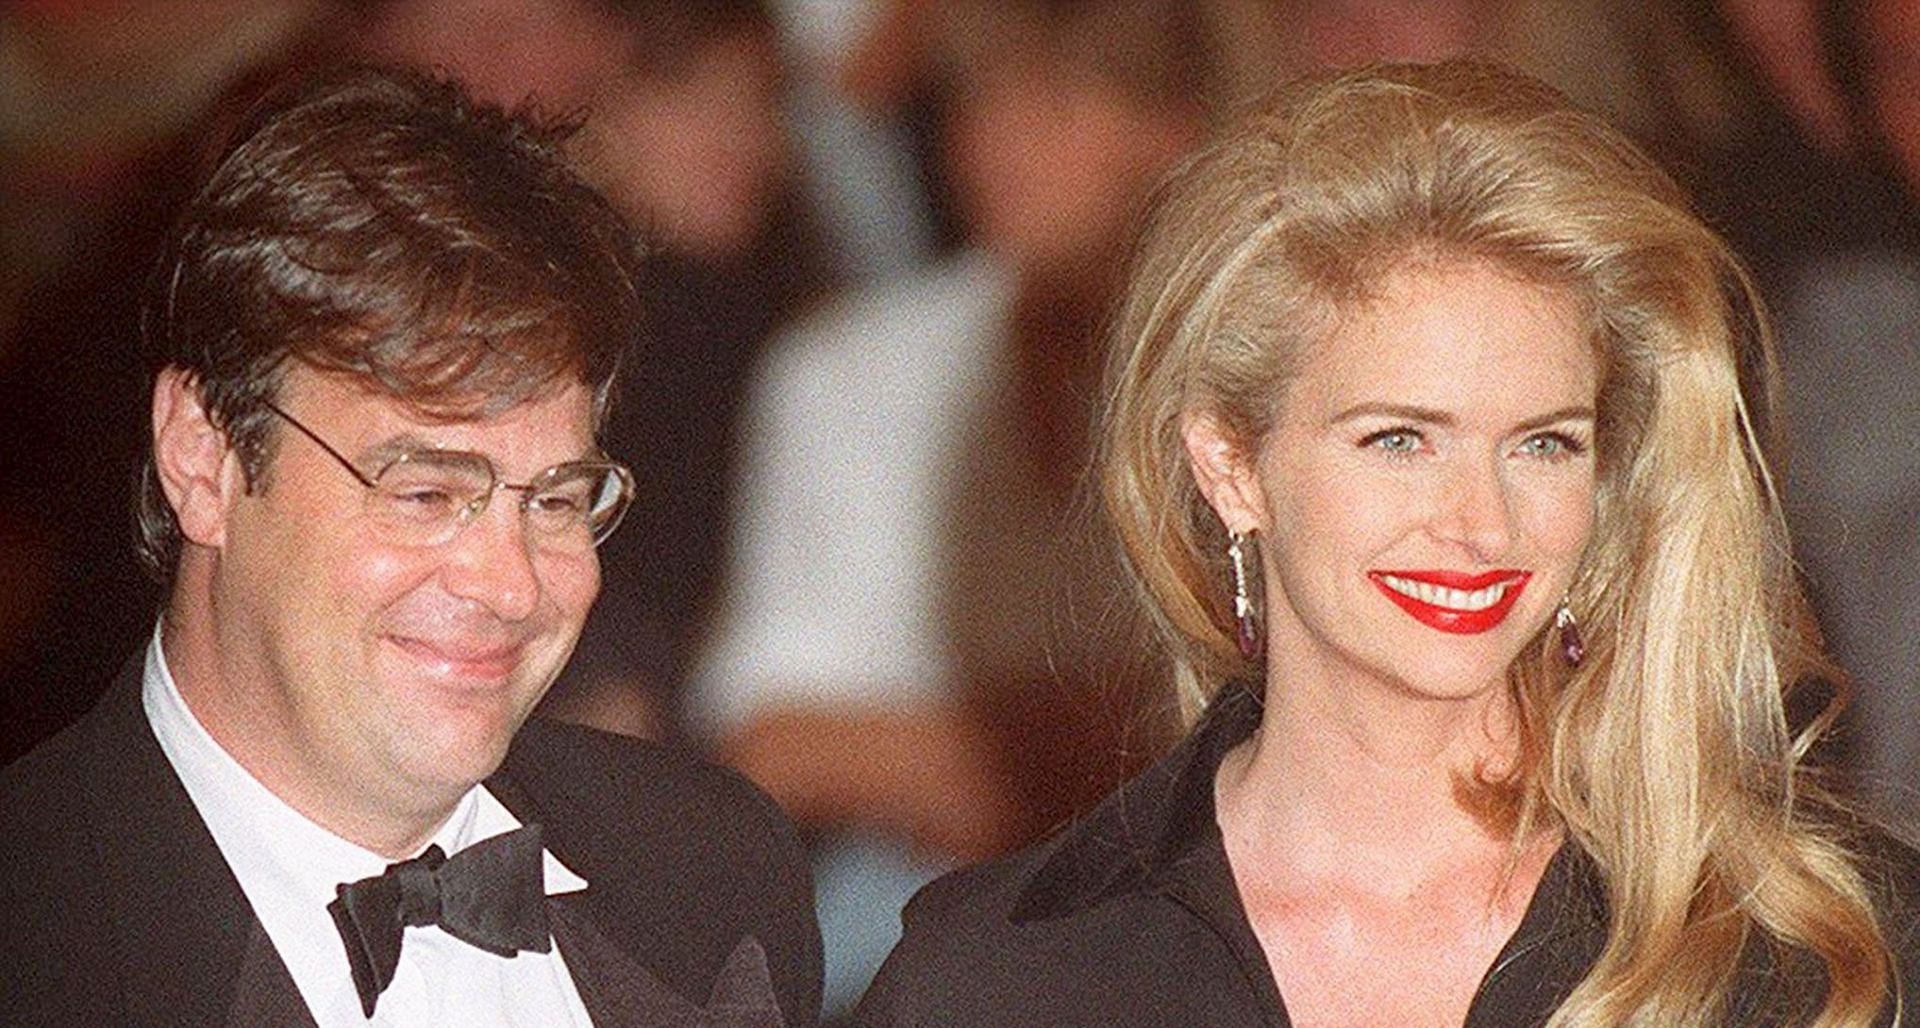 Dan Aykroyd and Donna Dixon share three children together (Image via Getty Images)